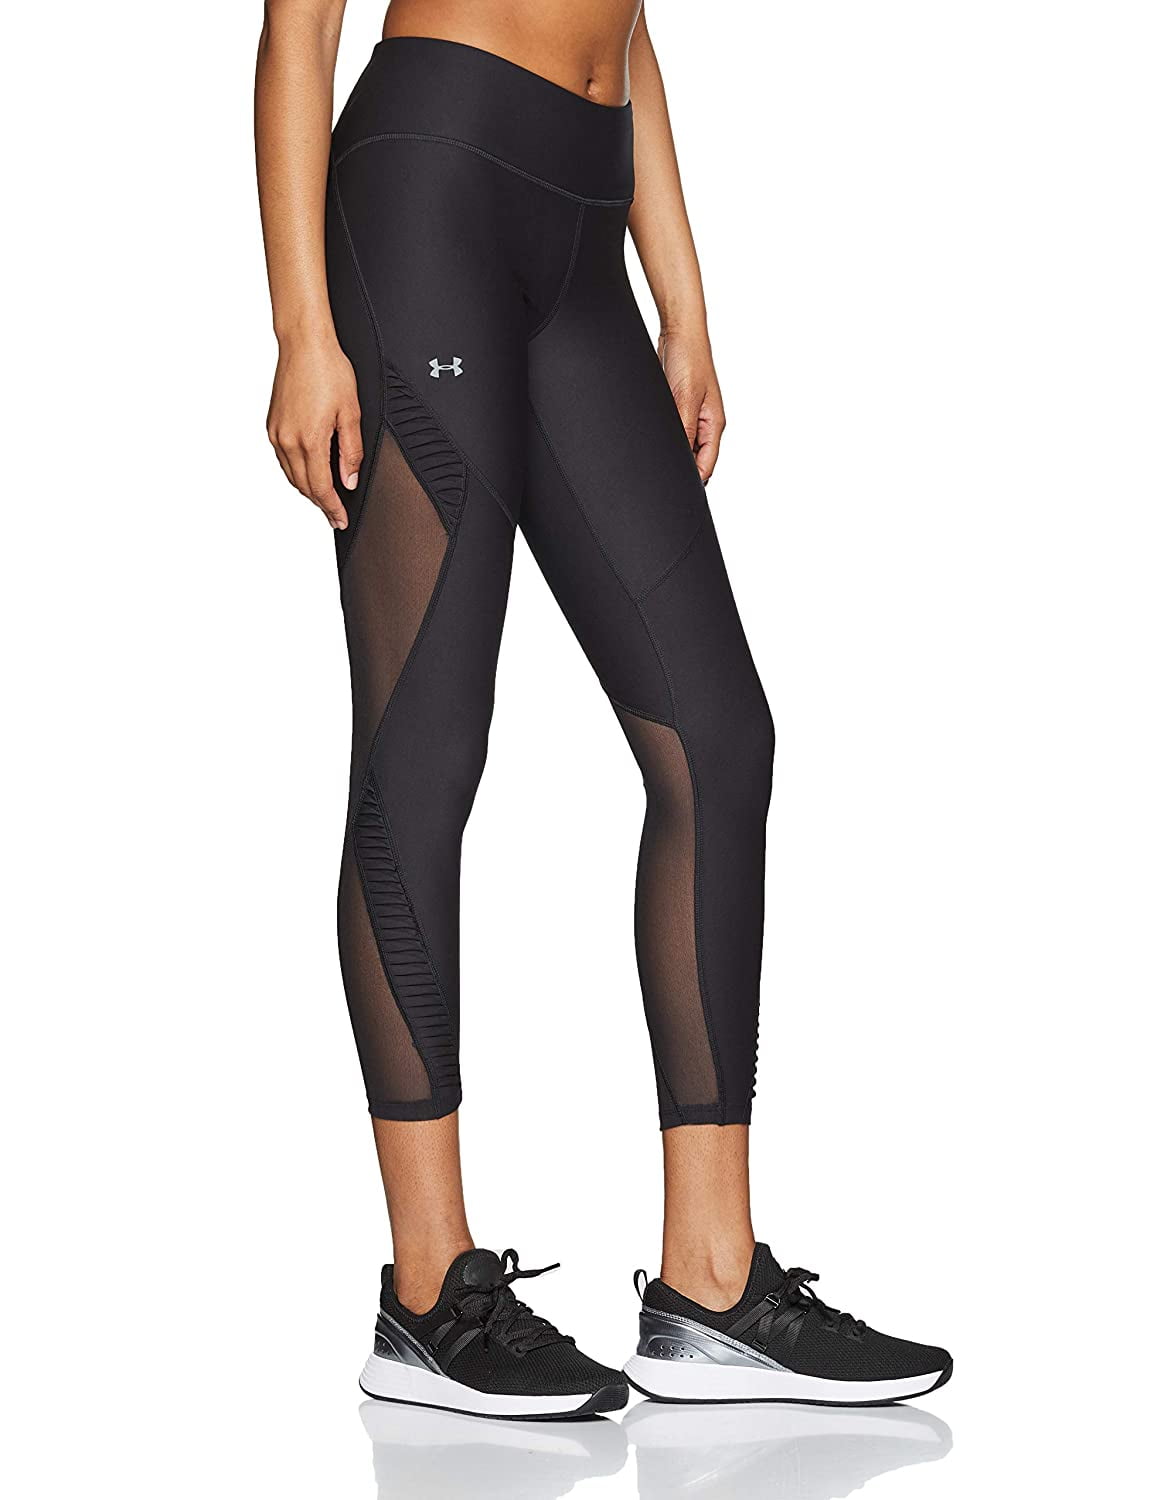 Under Armour Womens Vanished Pleated Ankle Leggings,Black/Tonal,XX-Large